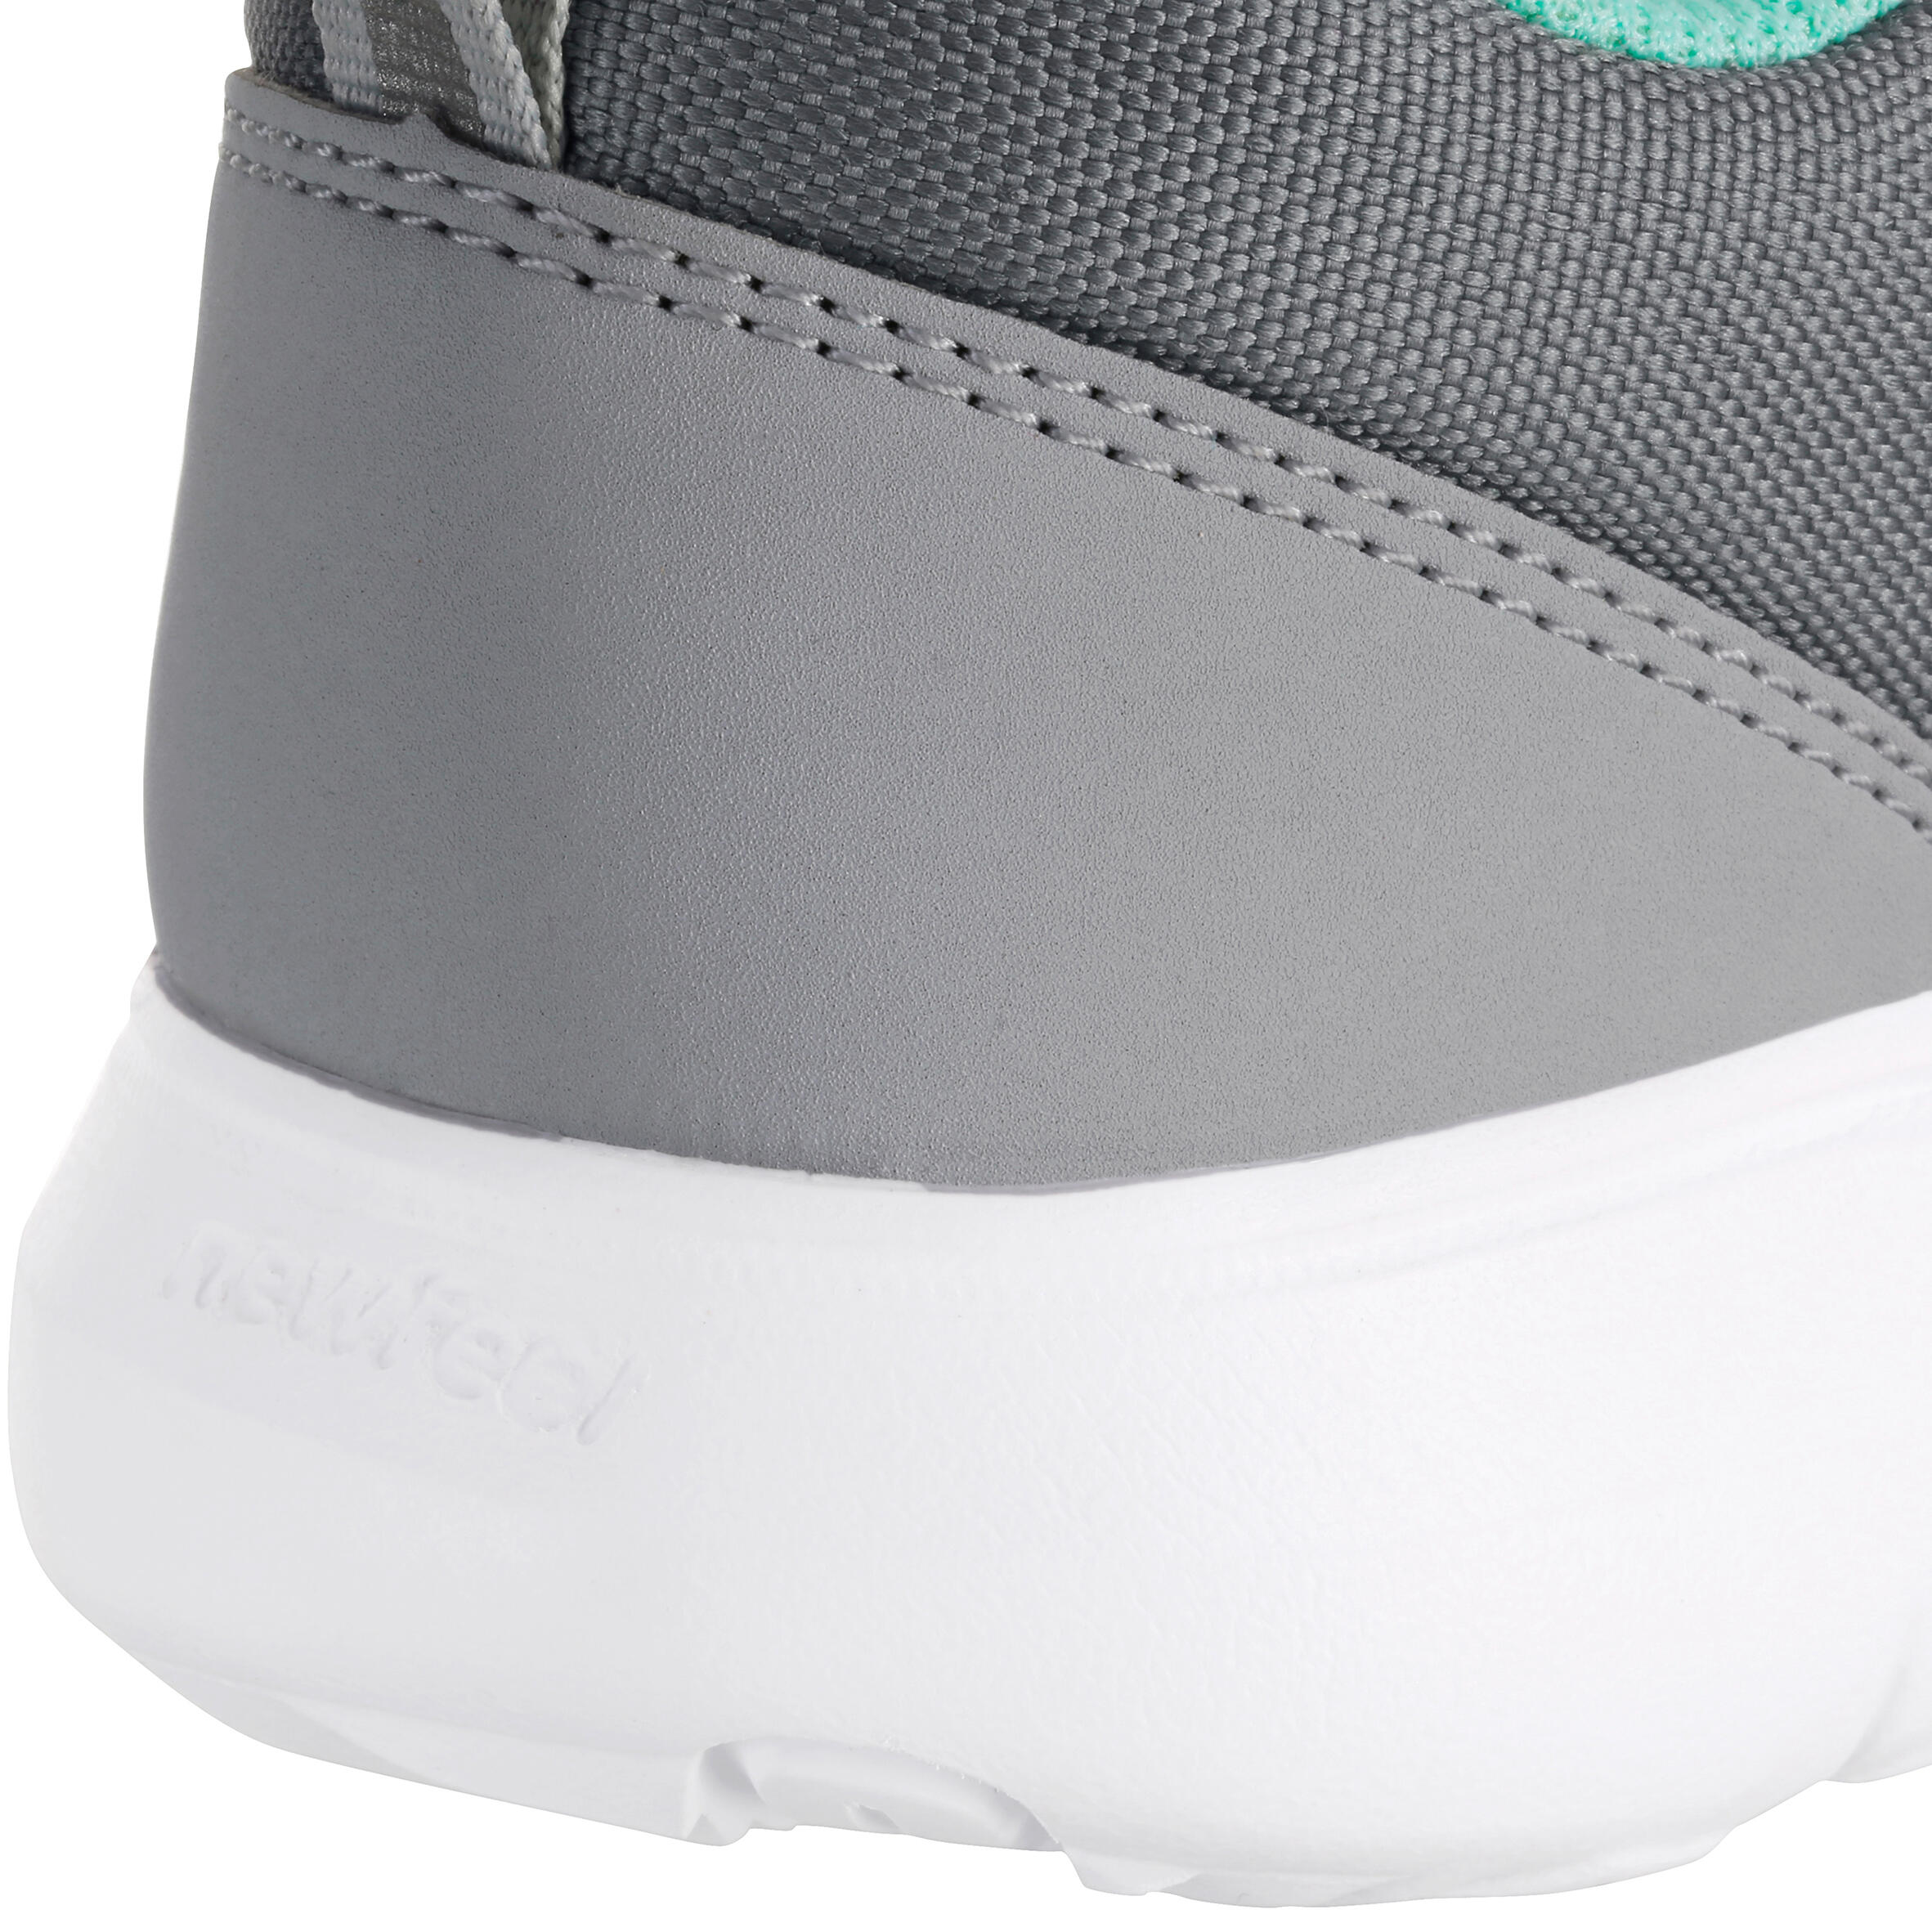 Soft 140 children's fitness walking shoes grey/turquoise 10/12